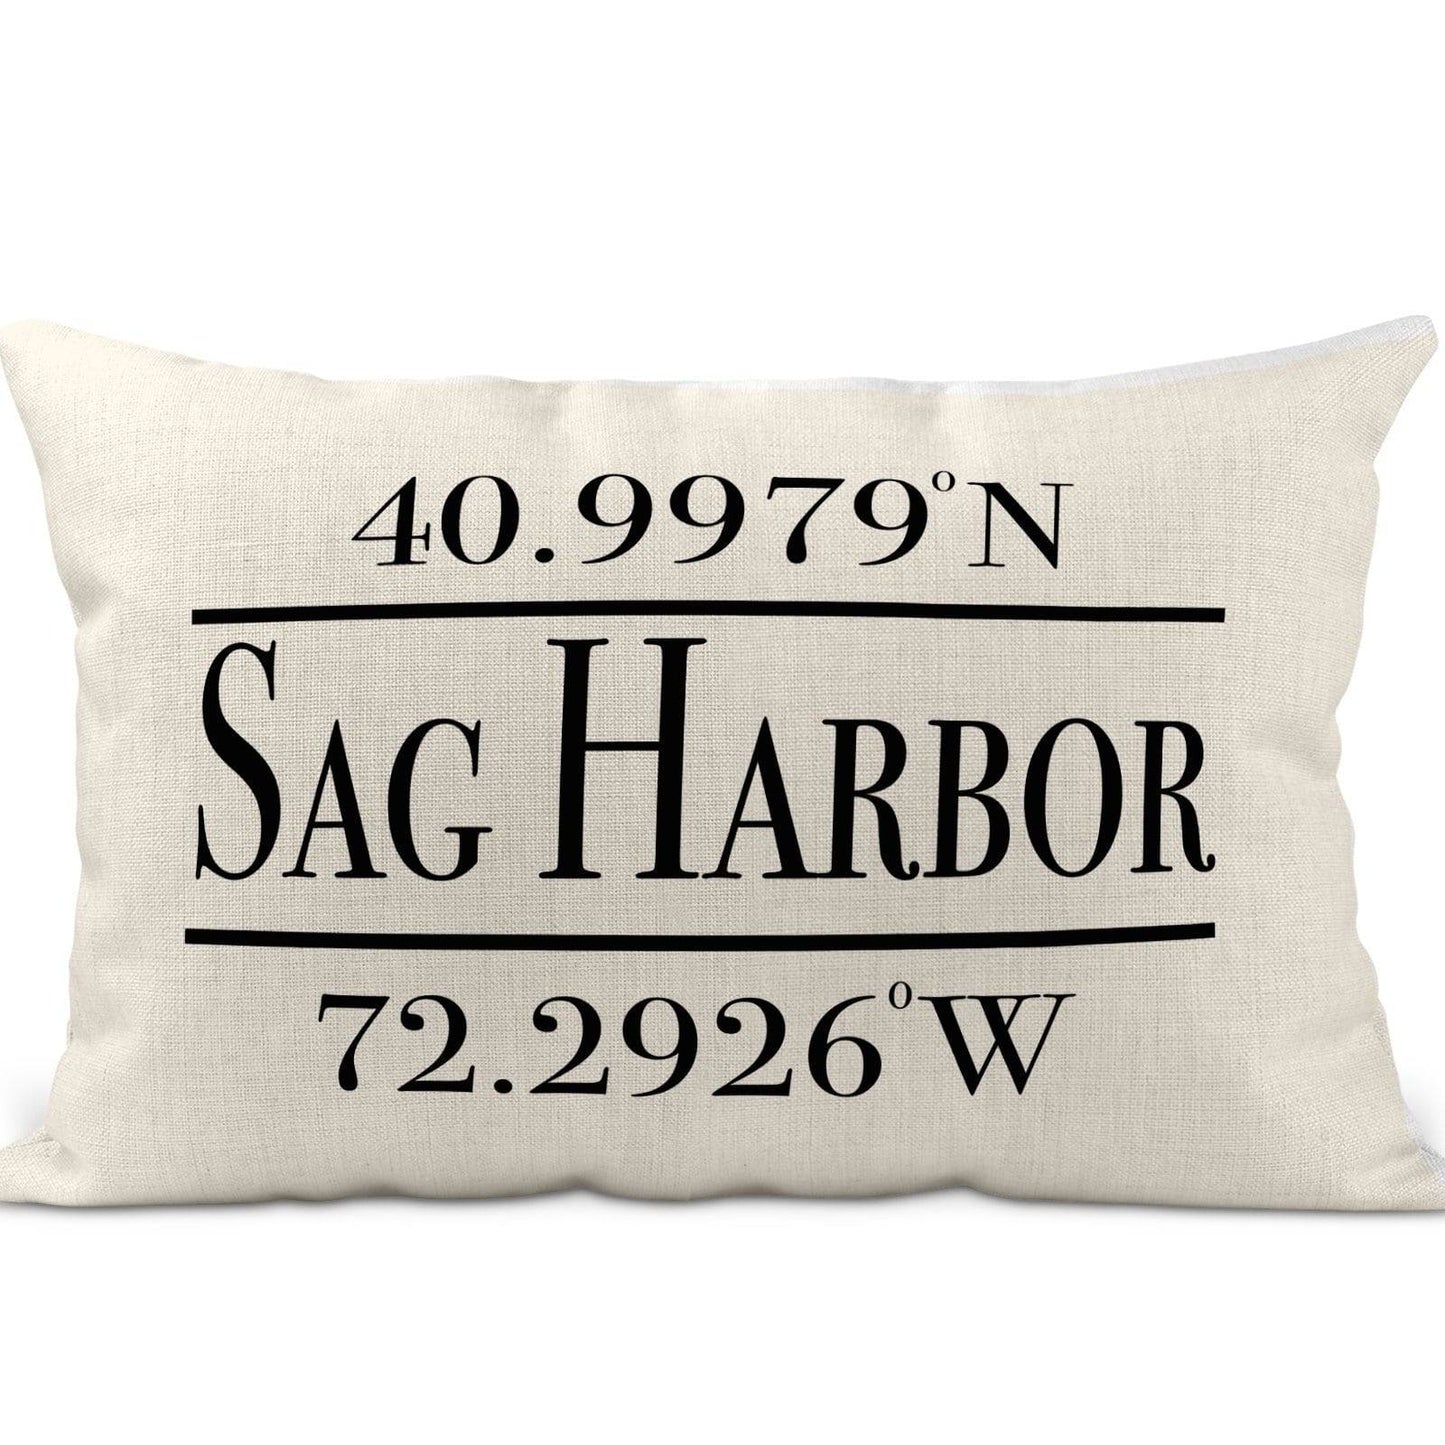 Sag Harbor Latitude Longitude Pillow - Drifts East, 12 x 20 beige poly linen pillow with Sag Harbor and its coordinates printed in black ink